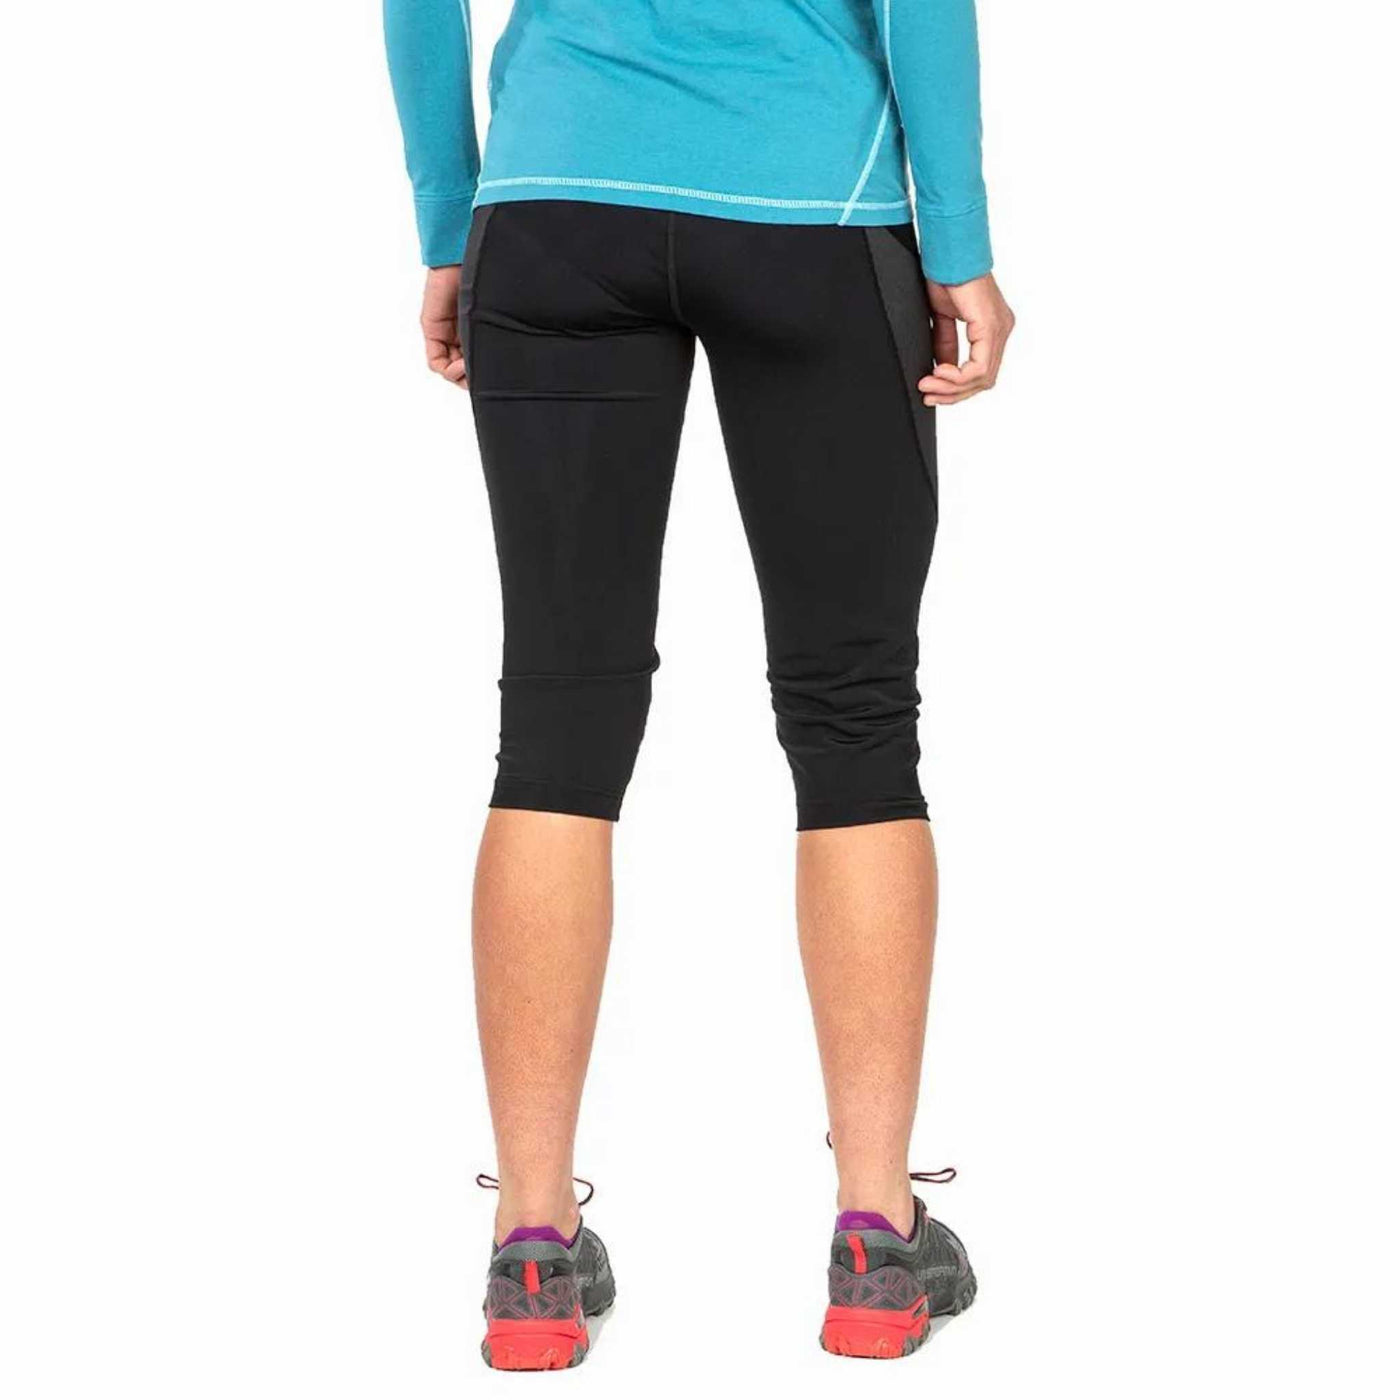 La Sportiva Triumph 3/4 Tights - Womens | Trail Running and Mountain Running Tights | Further Faster Christchurch NZ #black